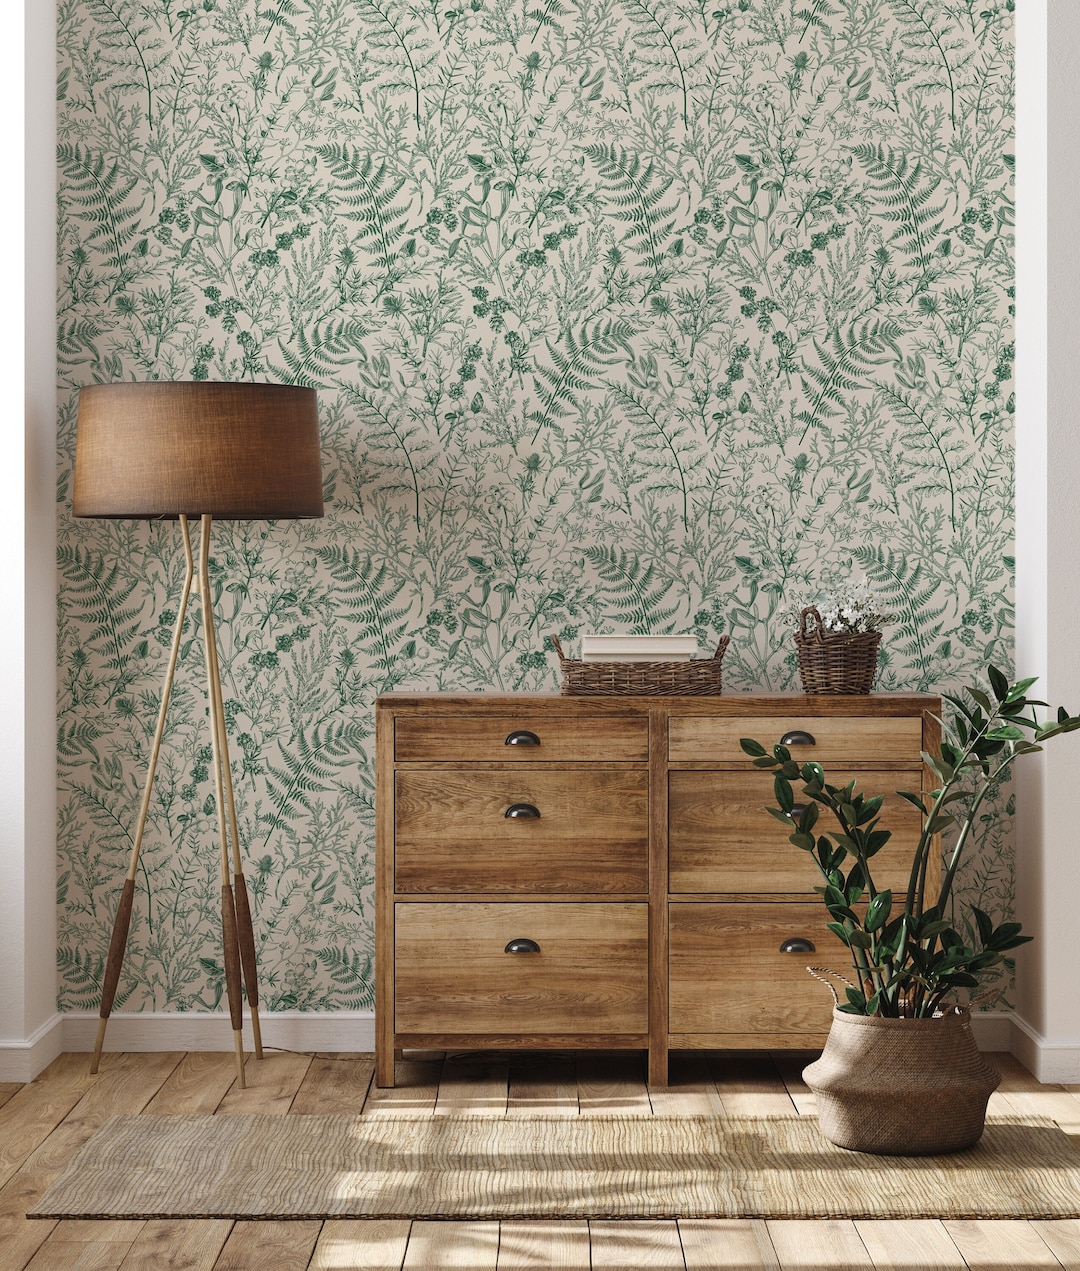 Botanical Fern Wallpaperpeel&stick and Traditional Wallpaper - Etsy